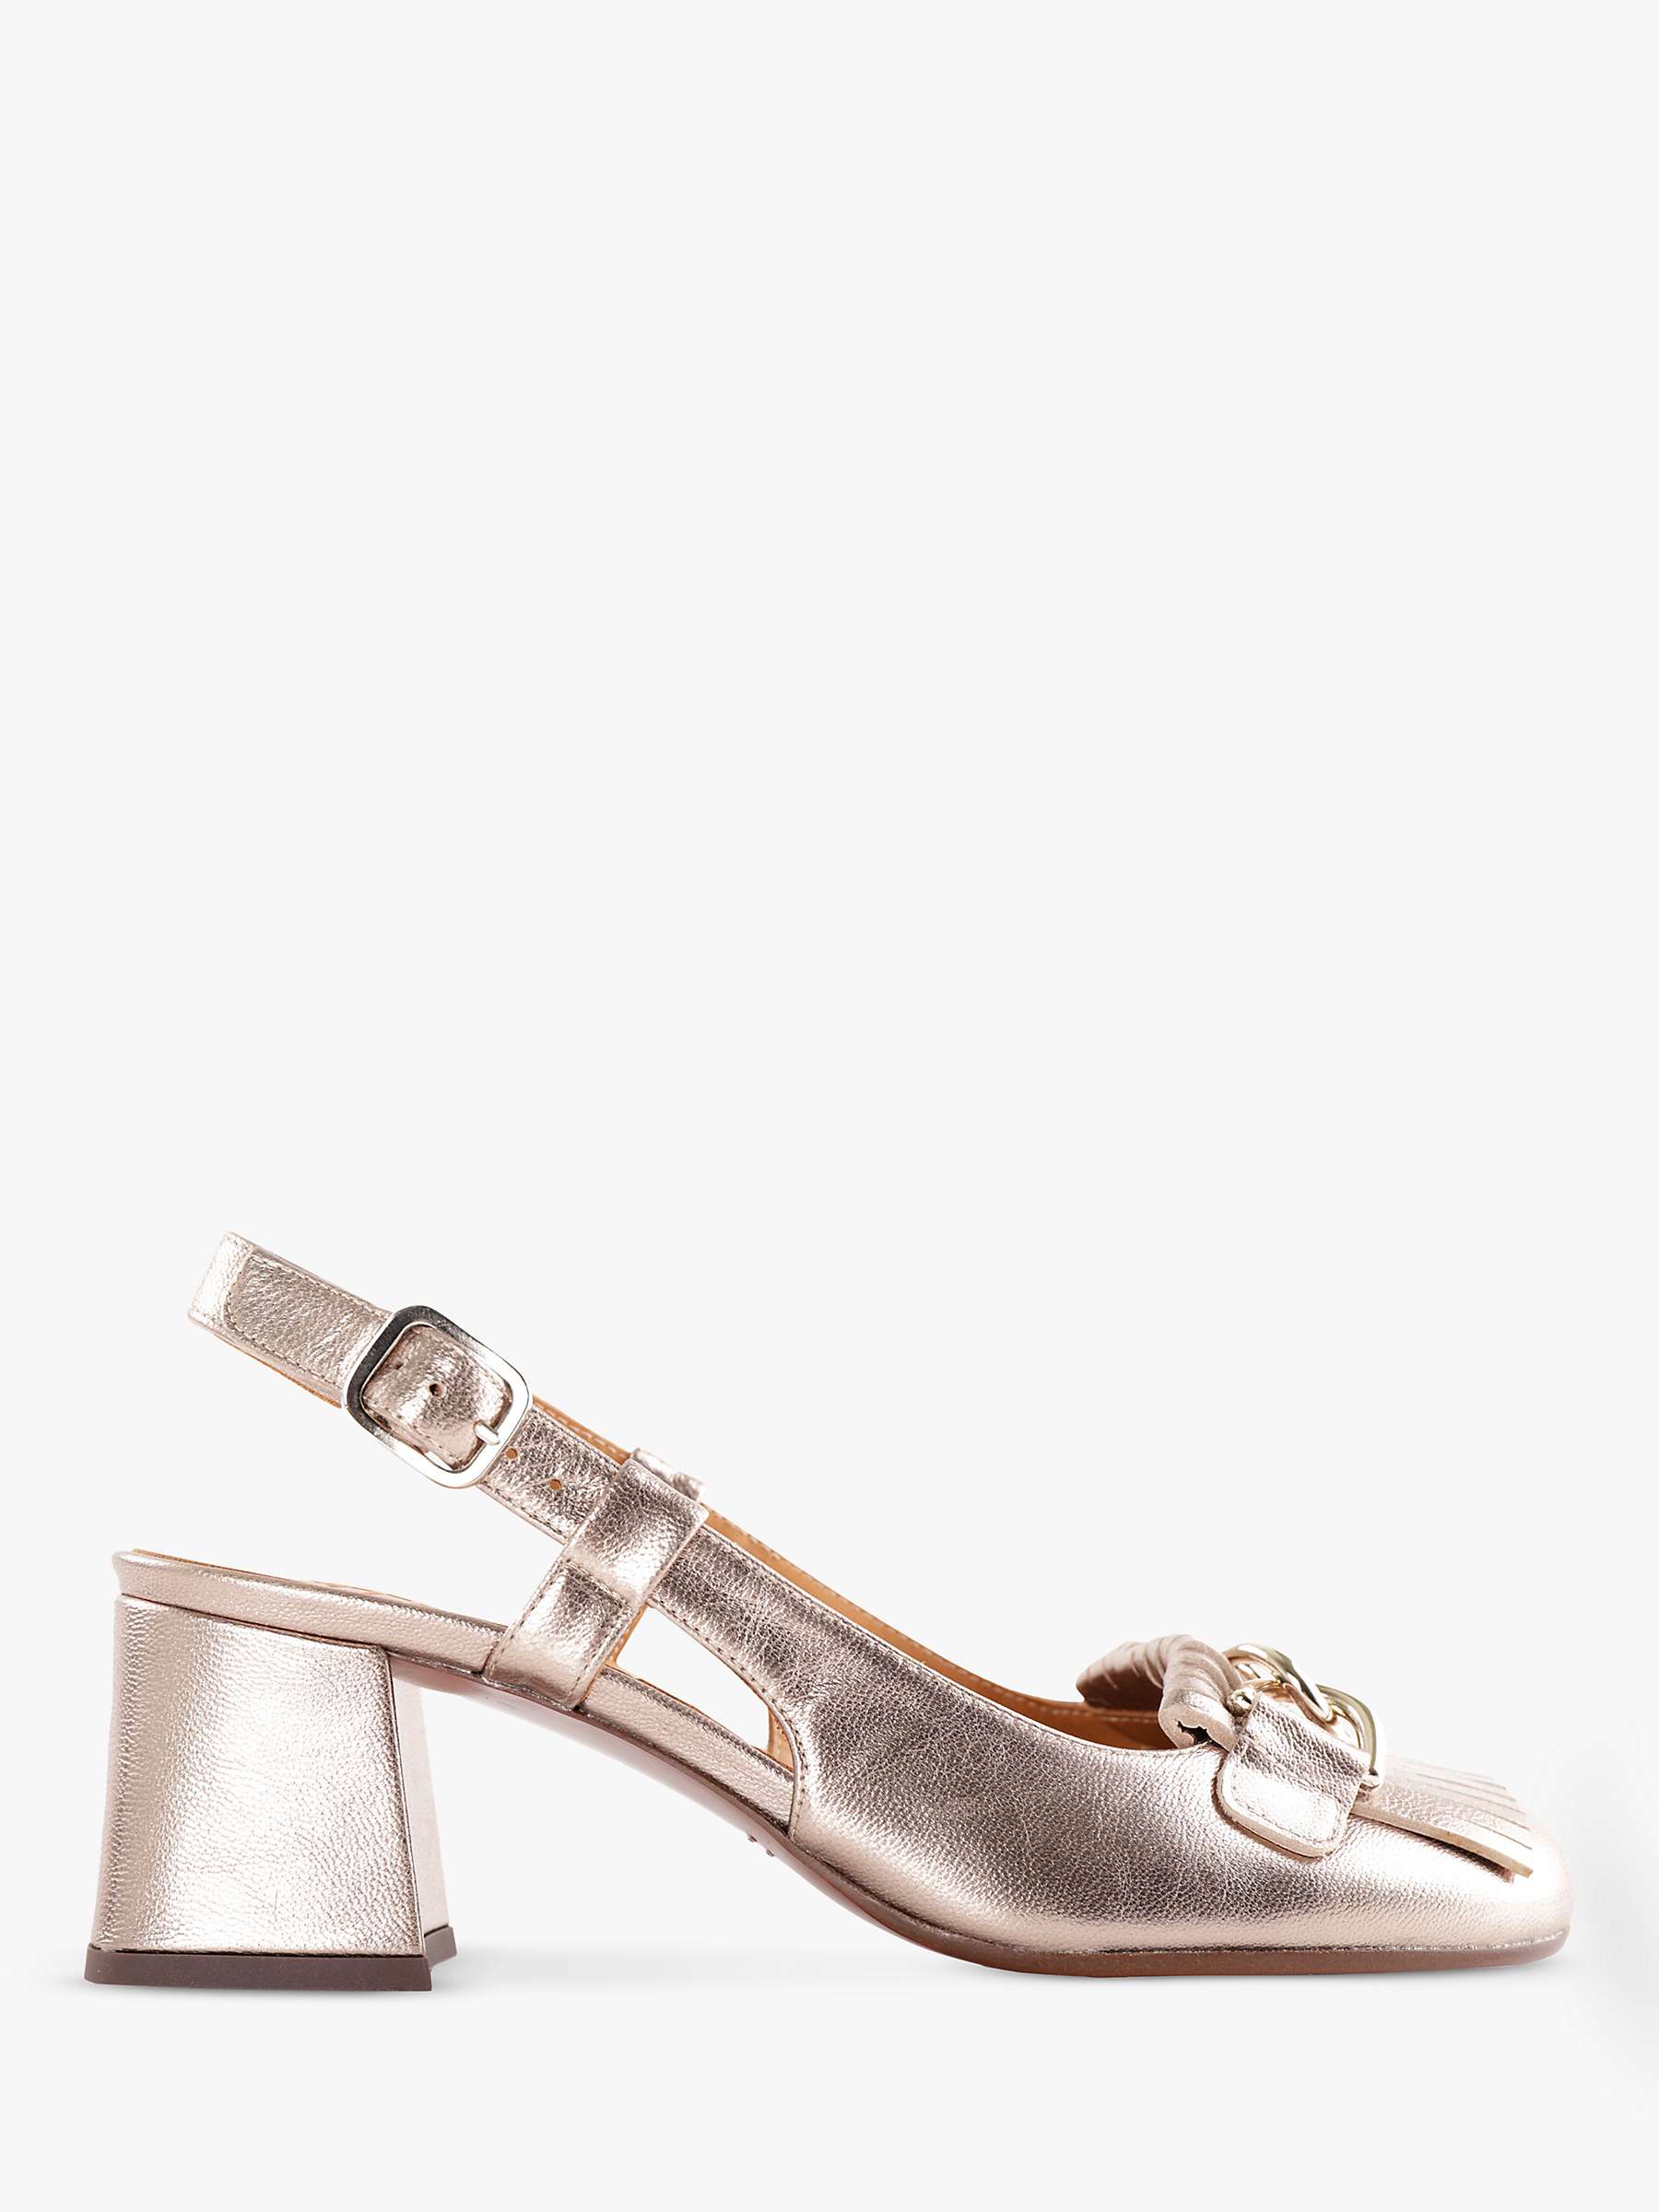 Buy Chie Mihara Mokumoku Leather Shoes, Iron Online at johnlewis.com